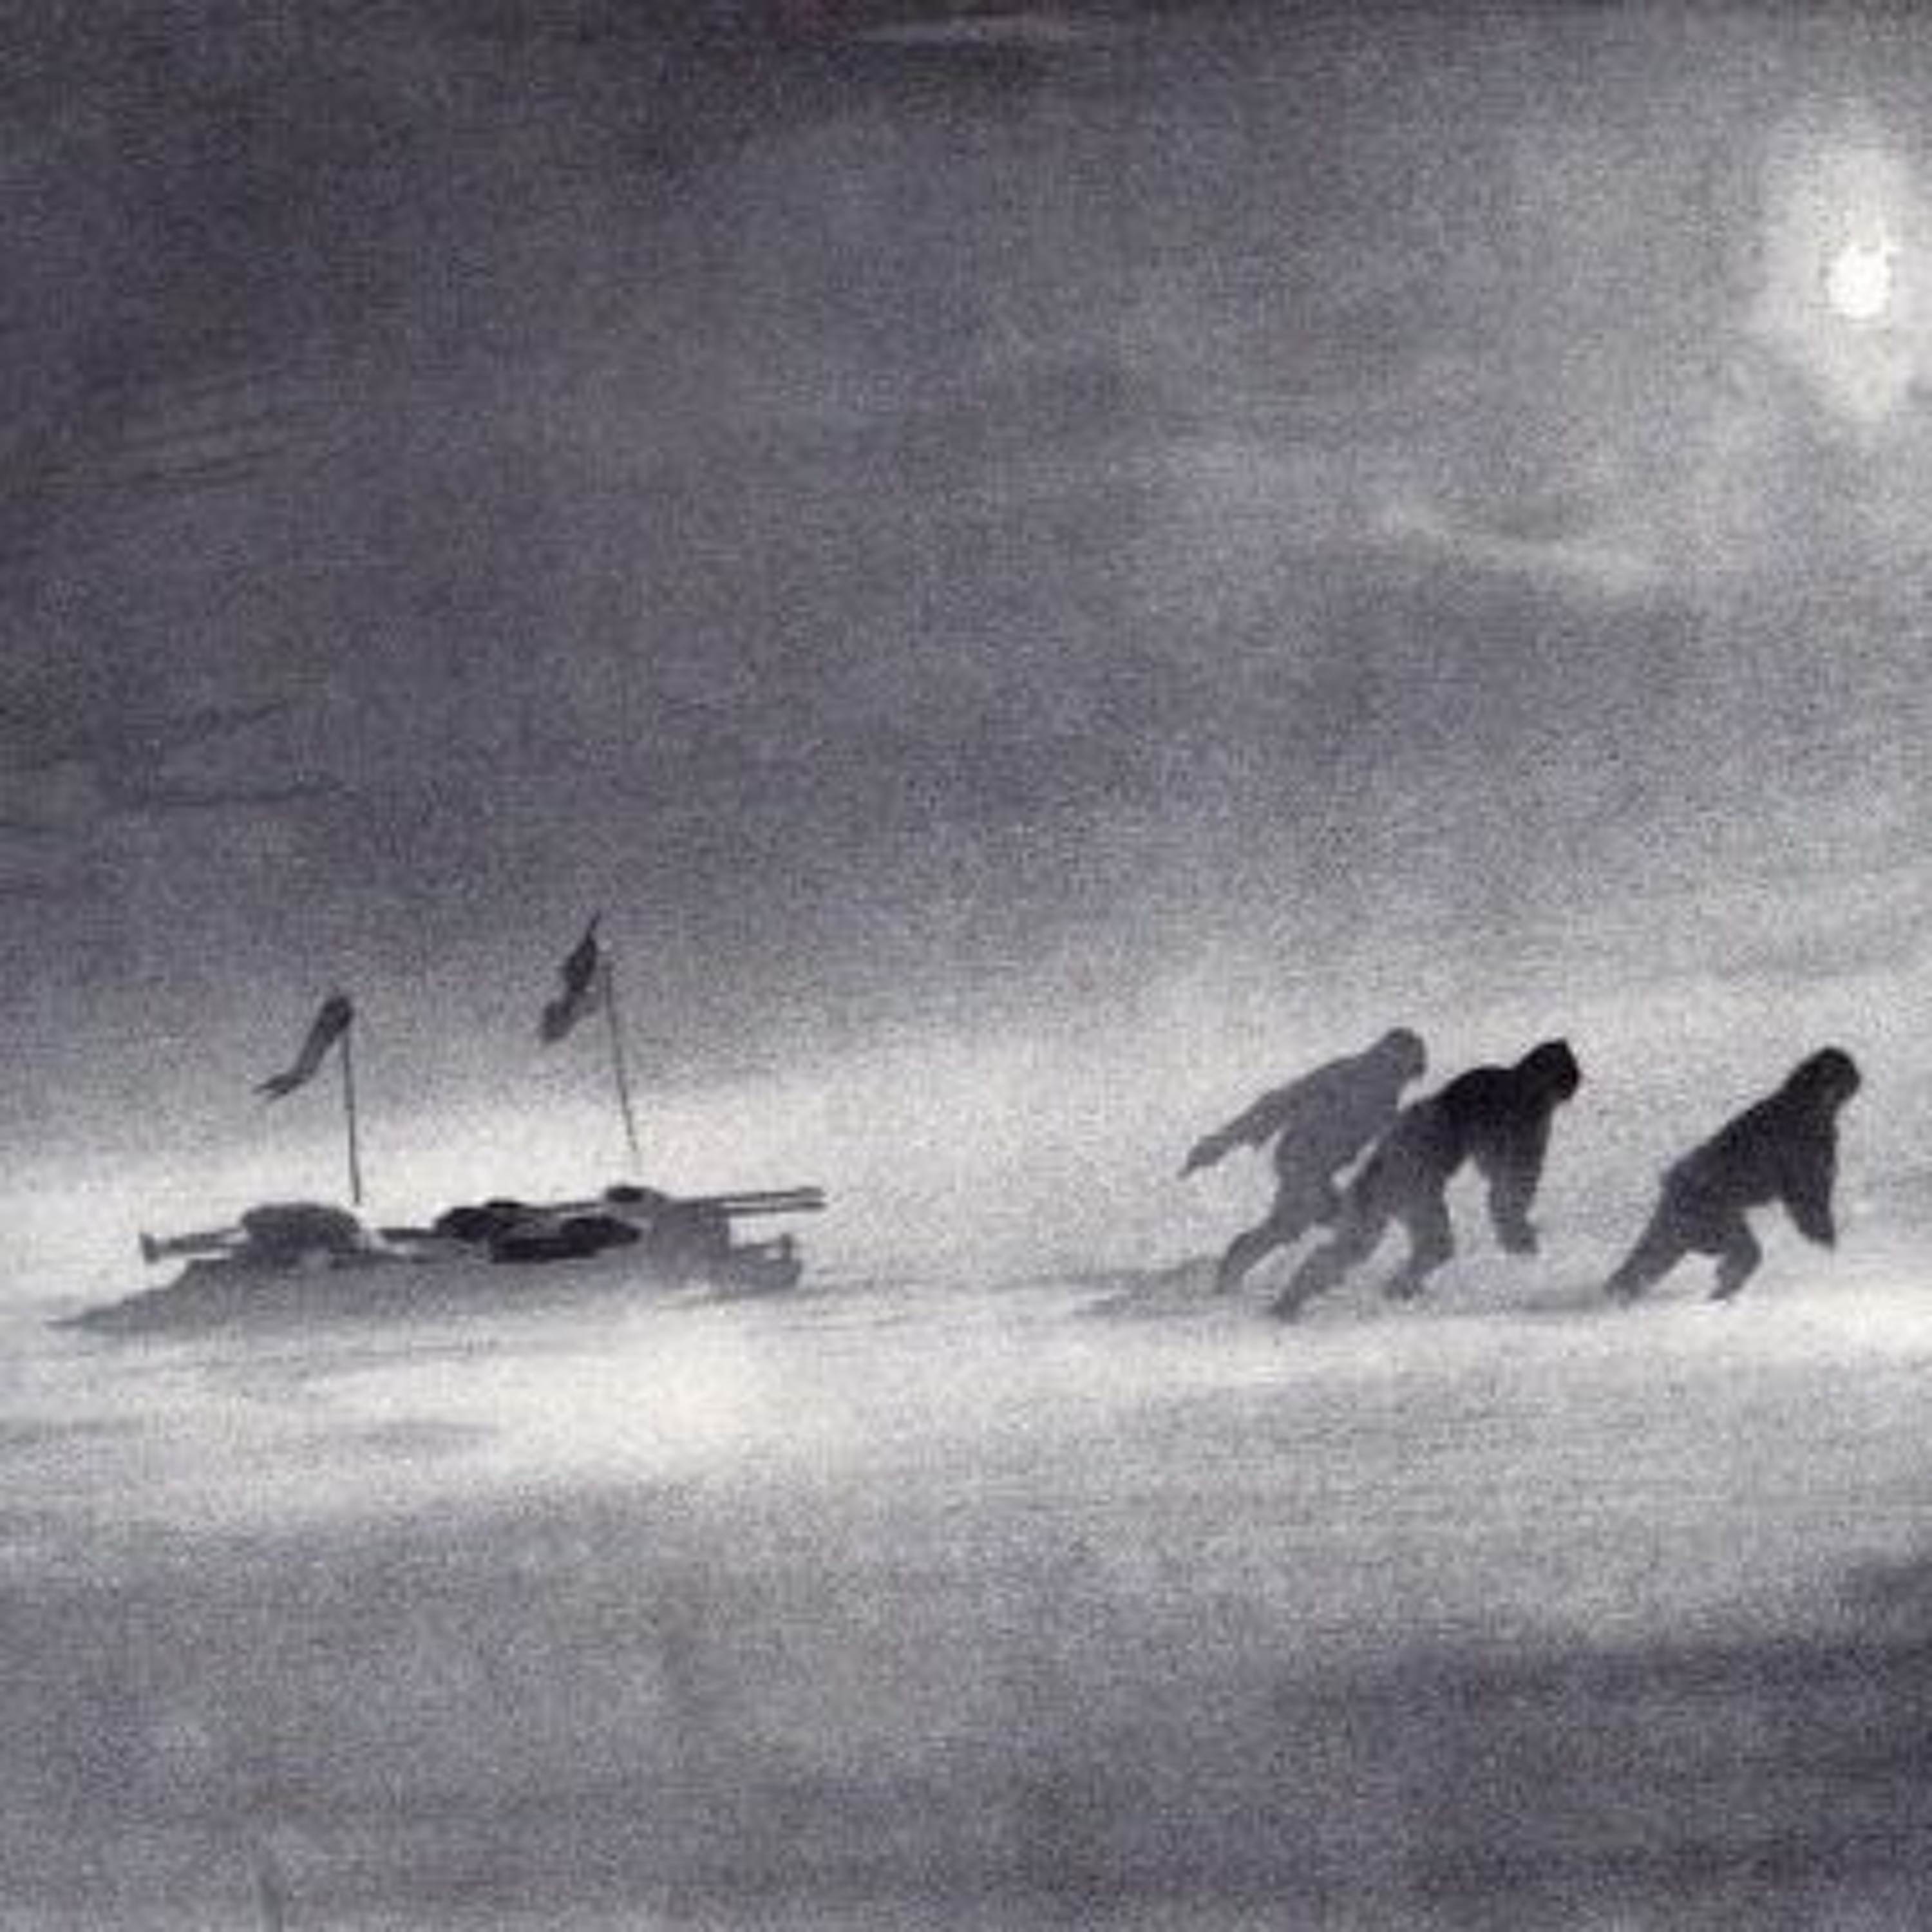 Episode 70: The Race to the South Pole, Part One